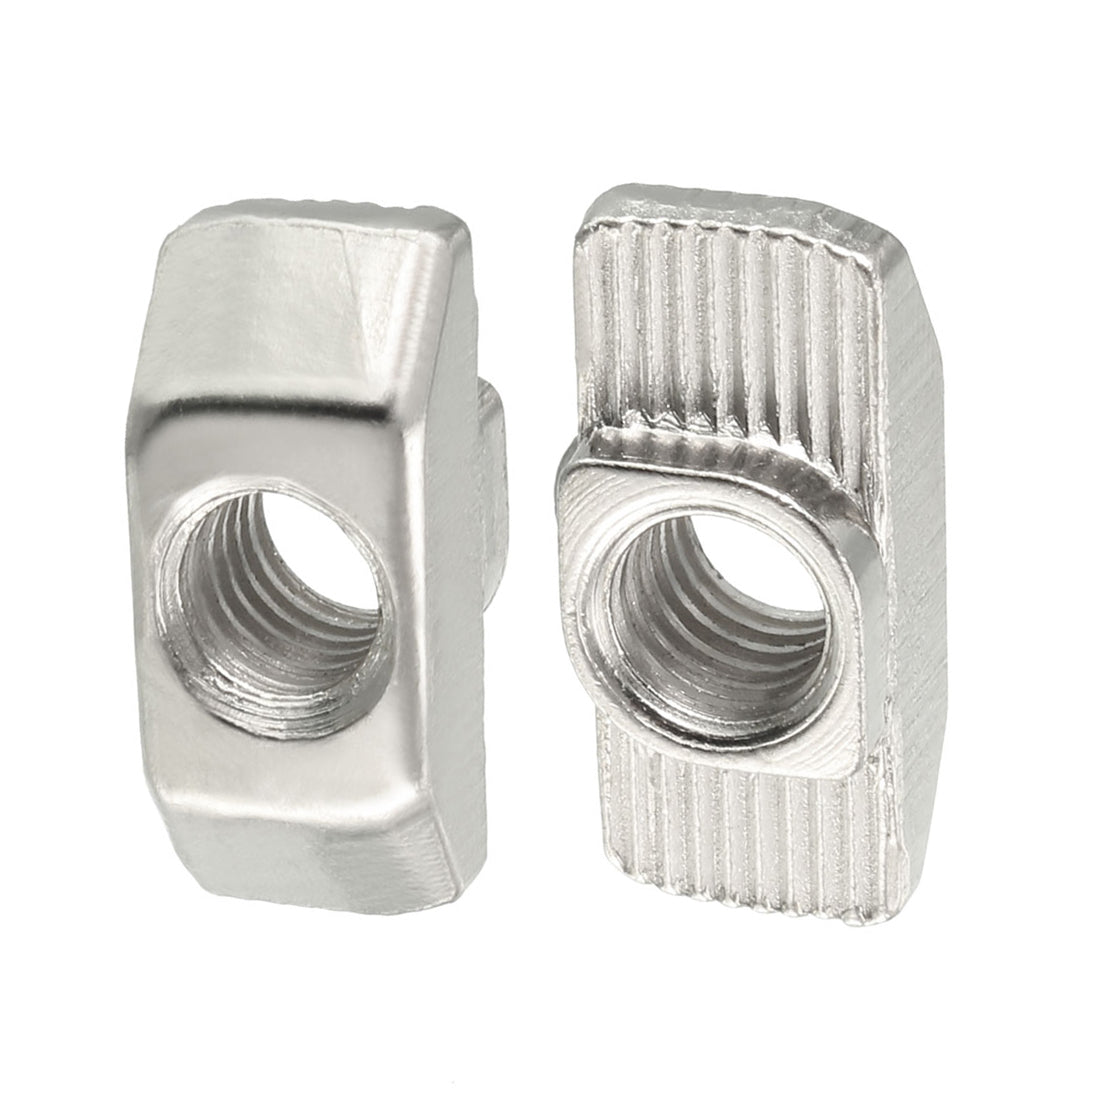 Uxcell Uxcell Sliding T Slot Nuts, M6 Thread for 4040 Series Aluminum Extrusion Profile 10pcs